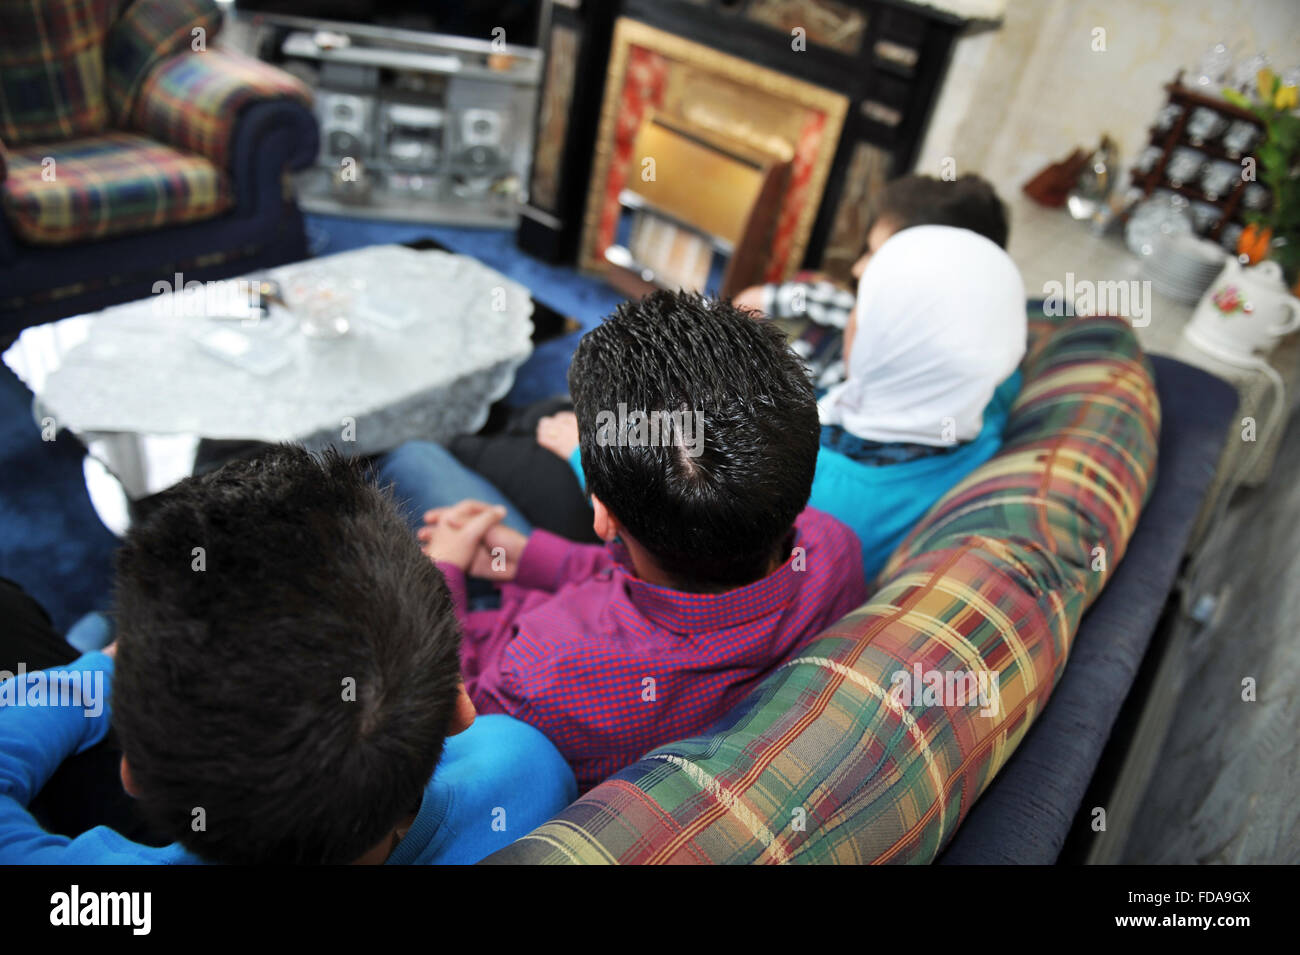 A Syrian refugee family rescued by the UN and now living in Bradford. Stock Photo